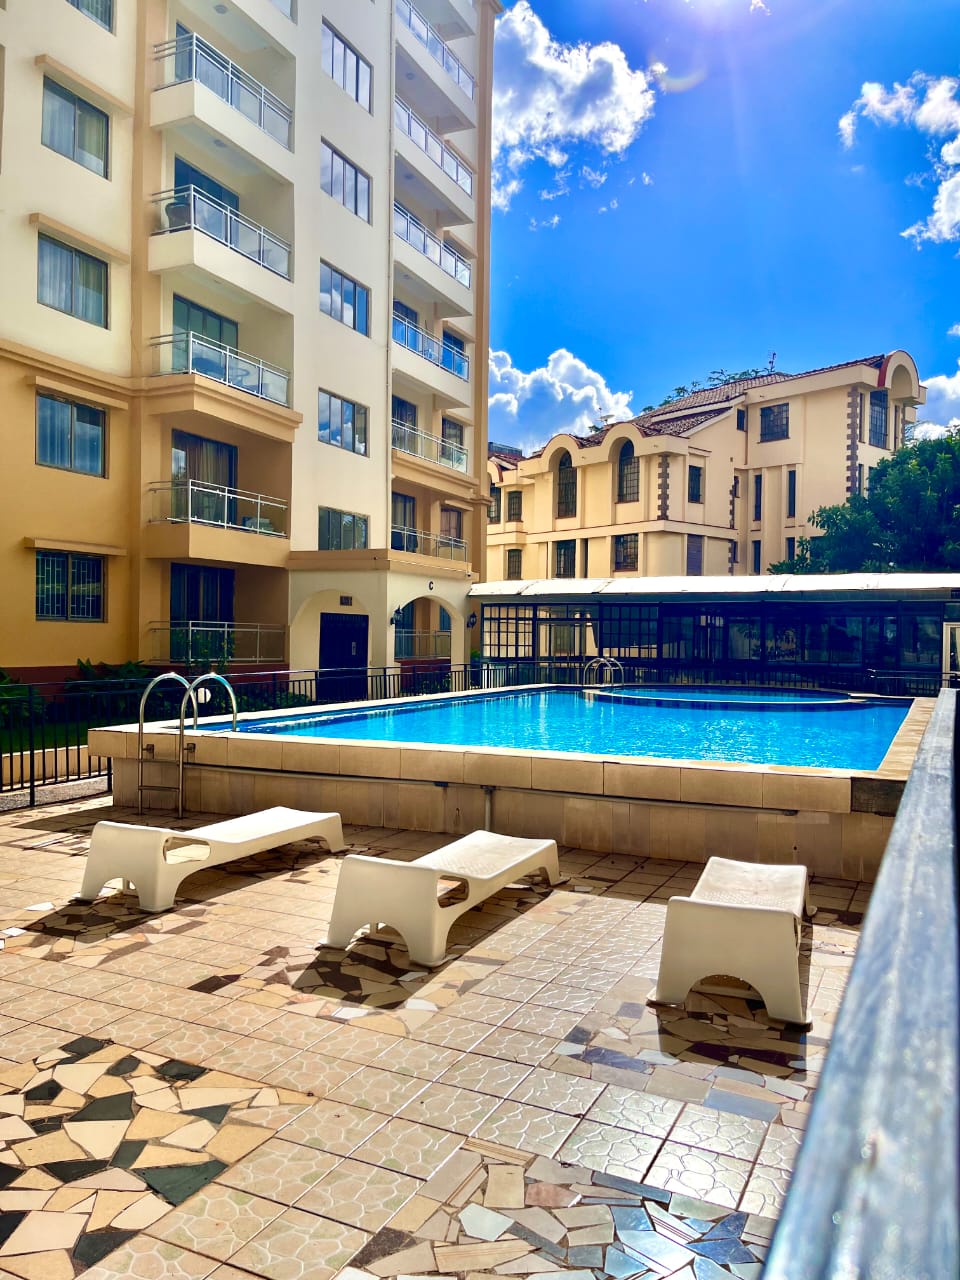 Fully furnished 1 Bedrooms apartment to let in Kilimani Nyangumi Road. Rates:95k Monthly. Has swimming pool. Musilli Homes